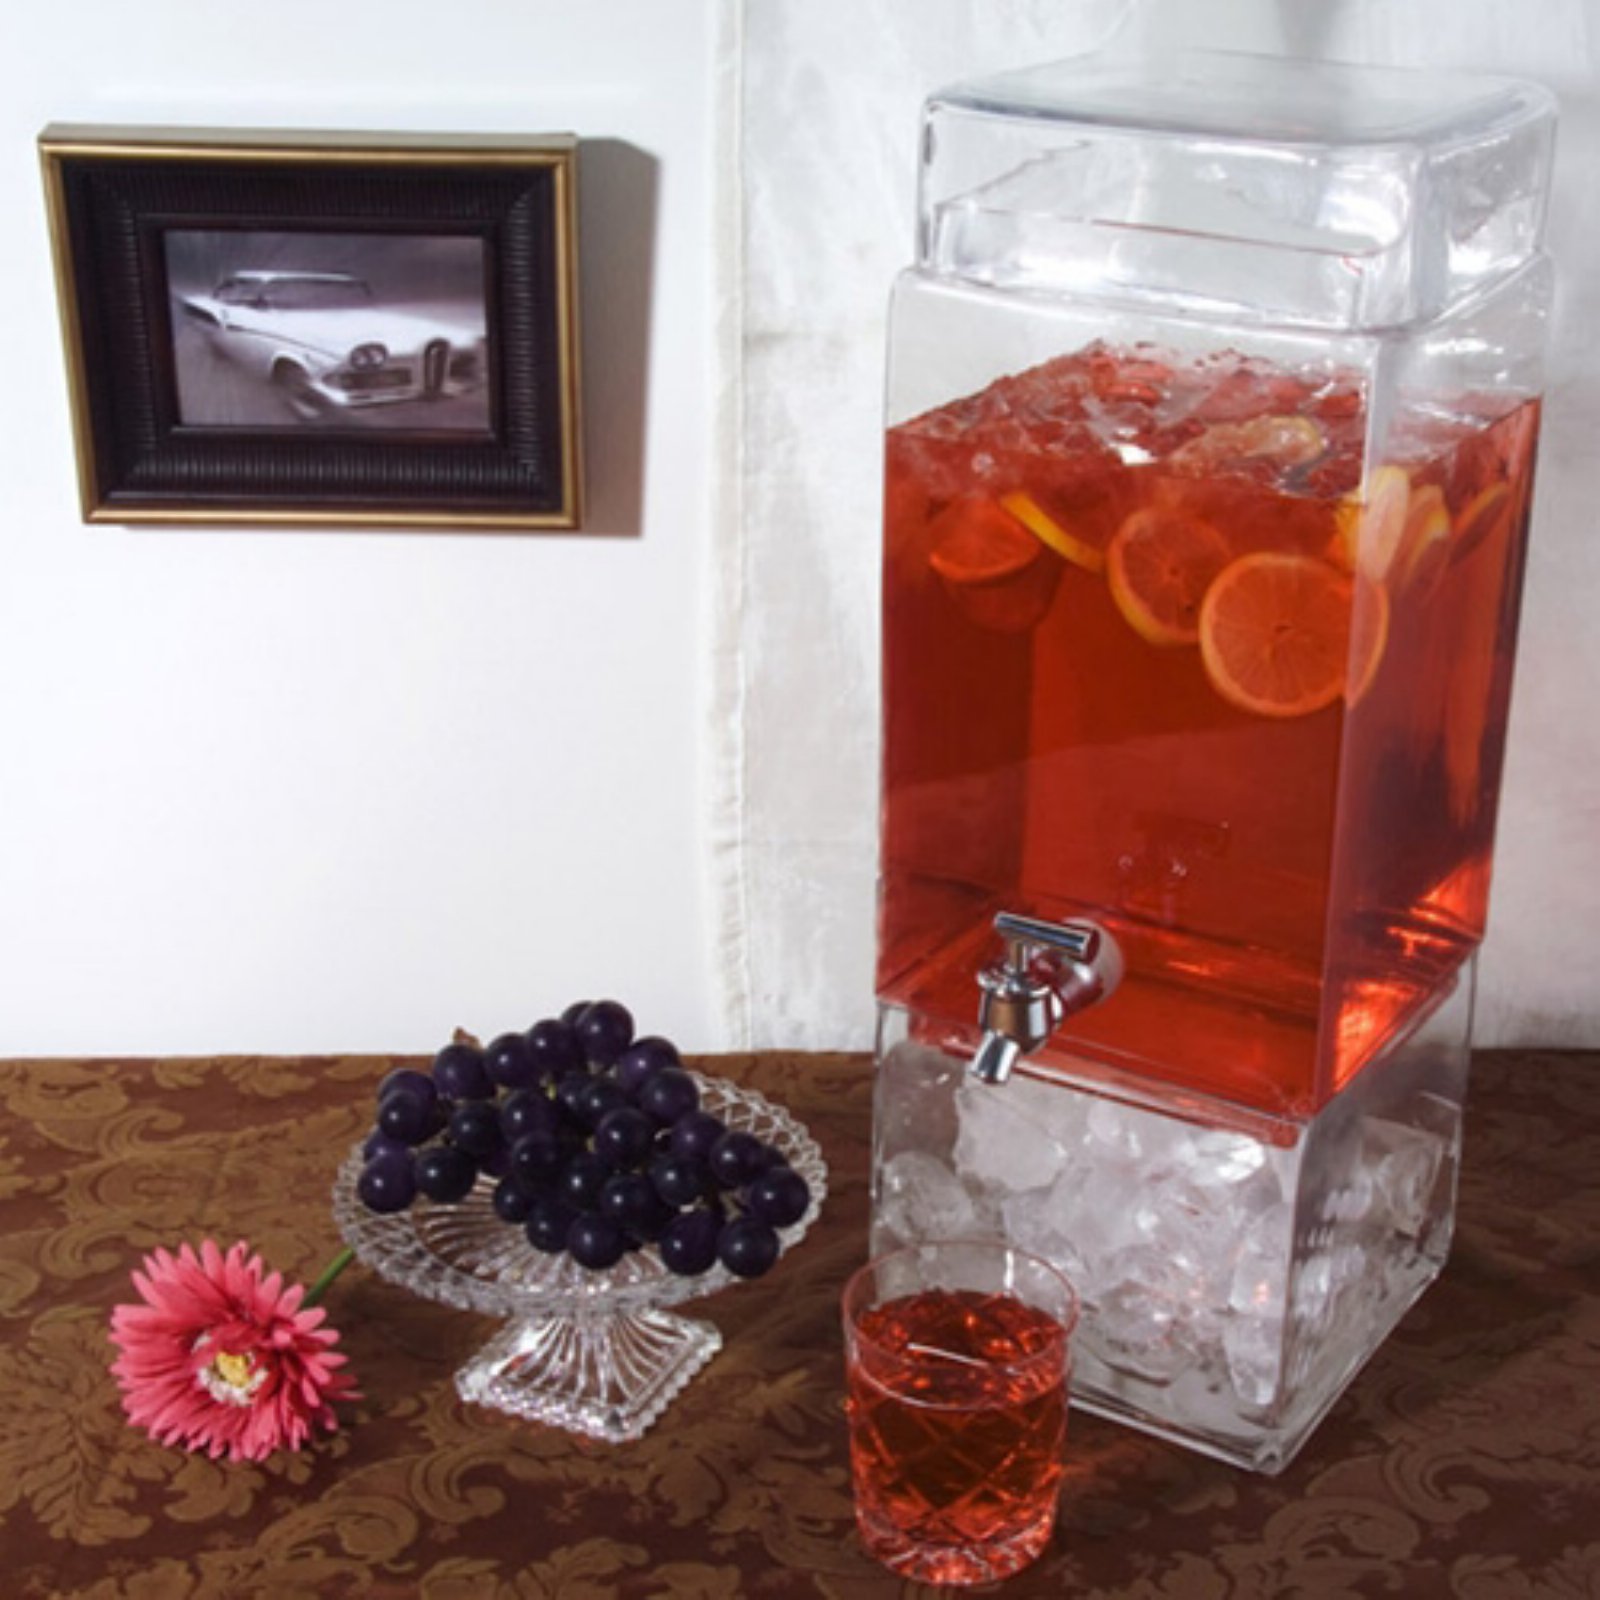 Godinger Square Glass Dispenser with Spout - image 1 of 2